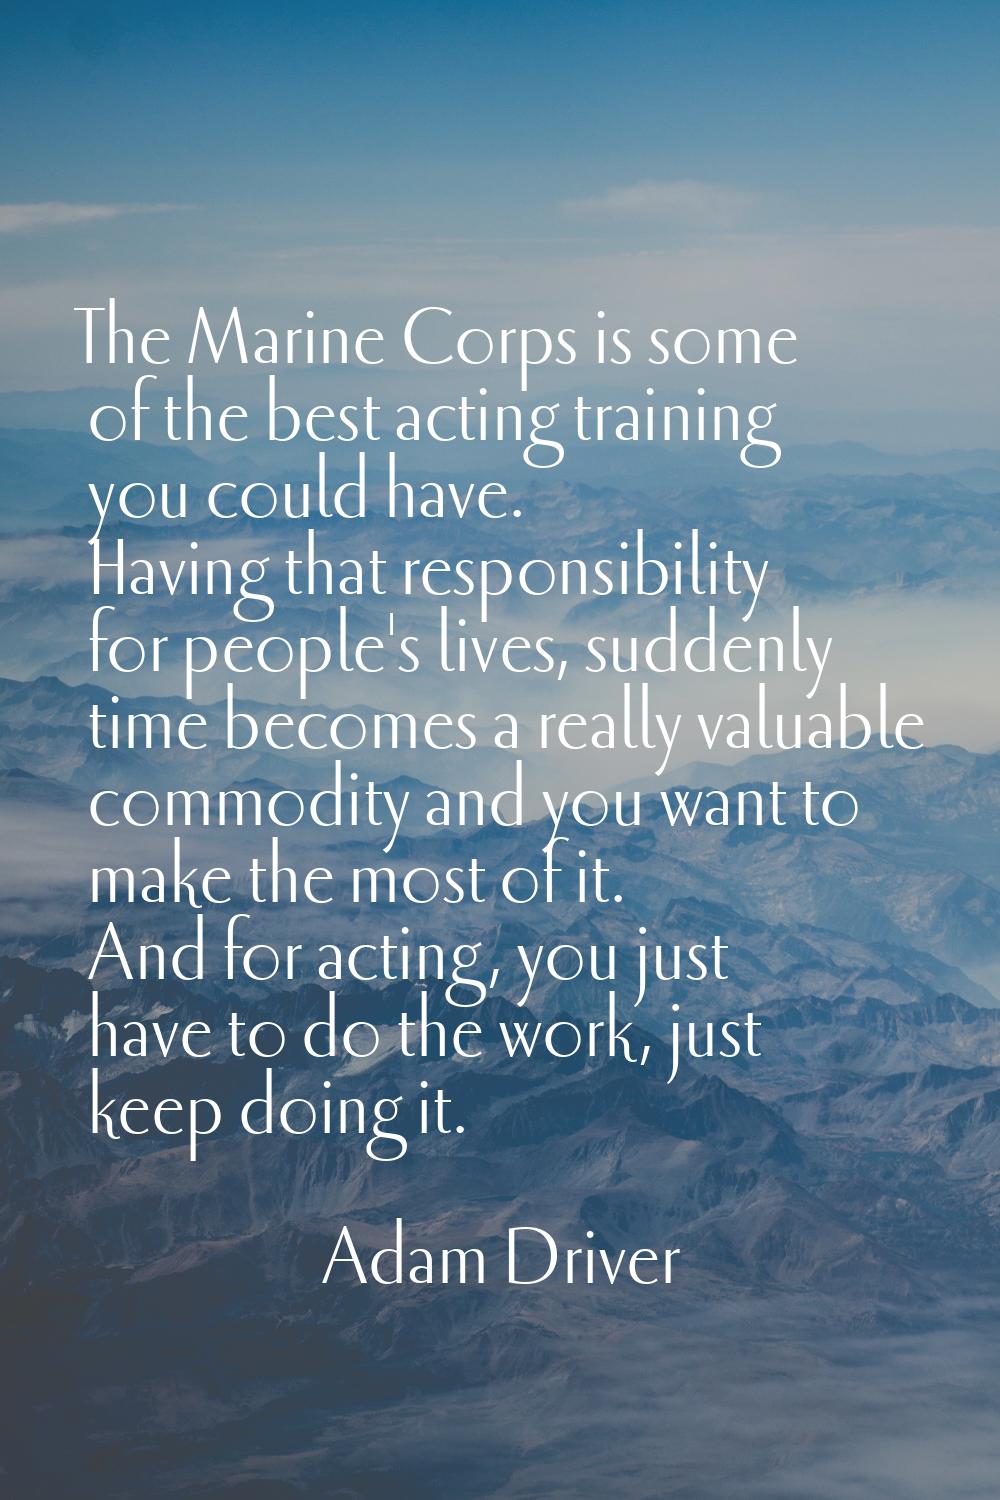 The Marine Corps is some of the best acting training you could have. Having that responsibility for